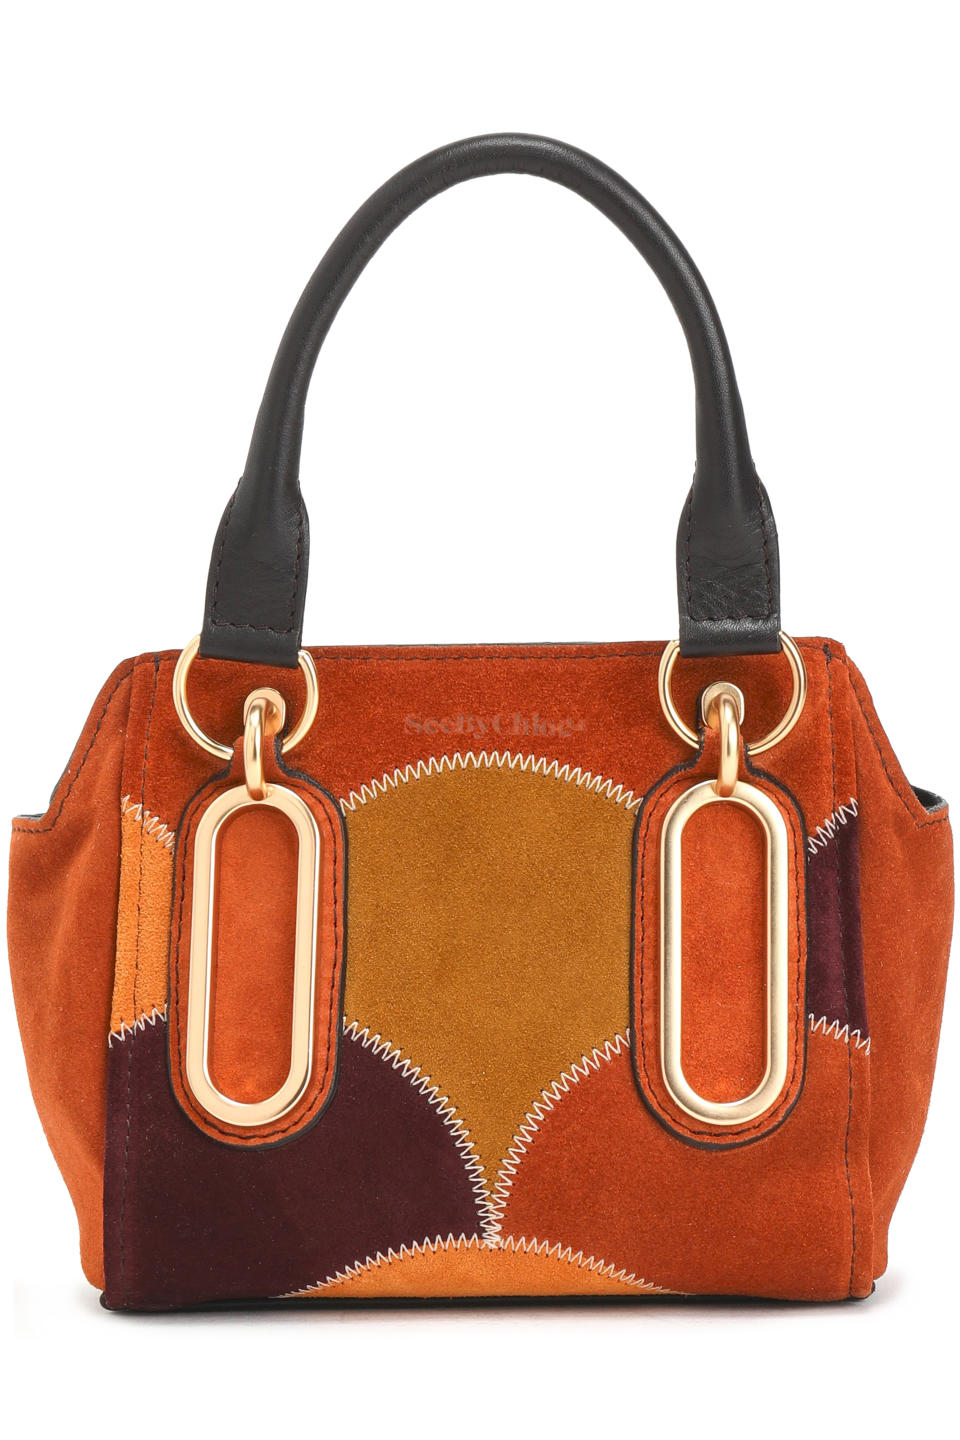 See by Chloé mini patchwork suede shoulder bag. (Photo: the Outnet)